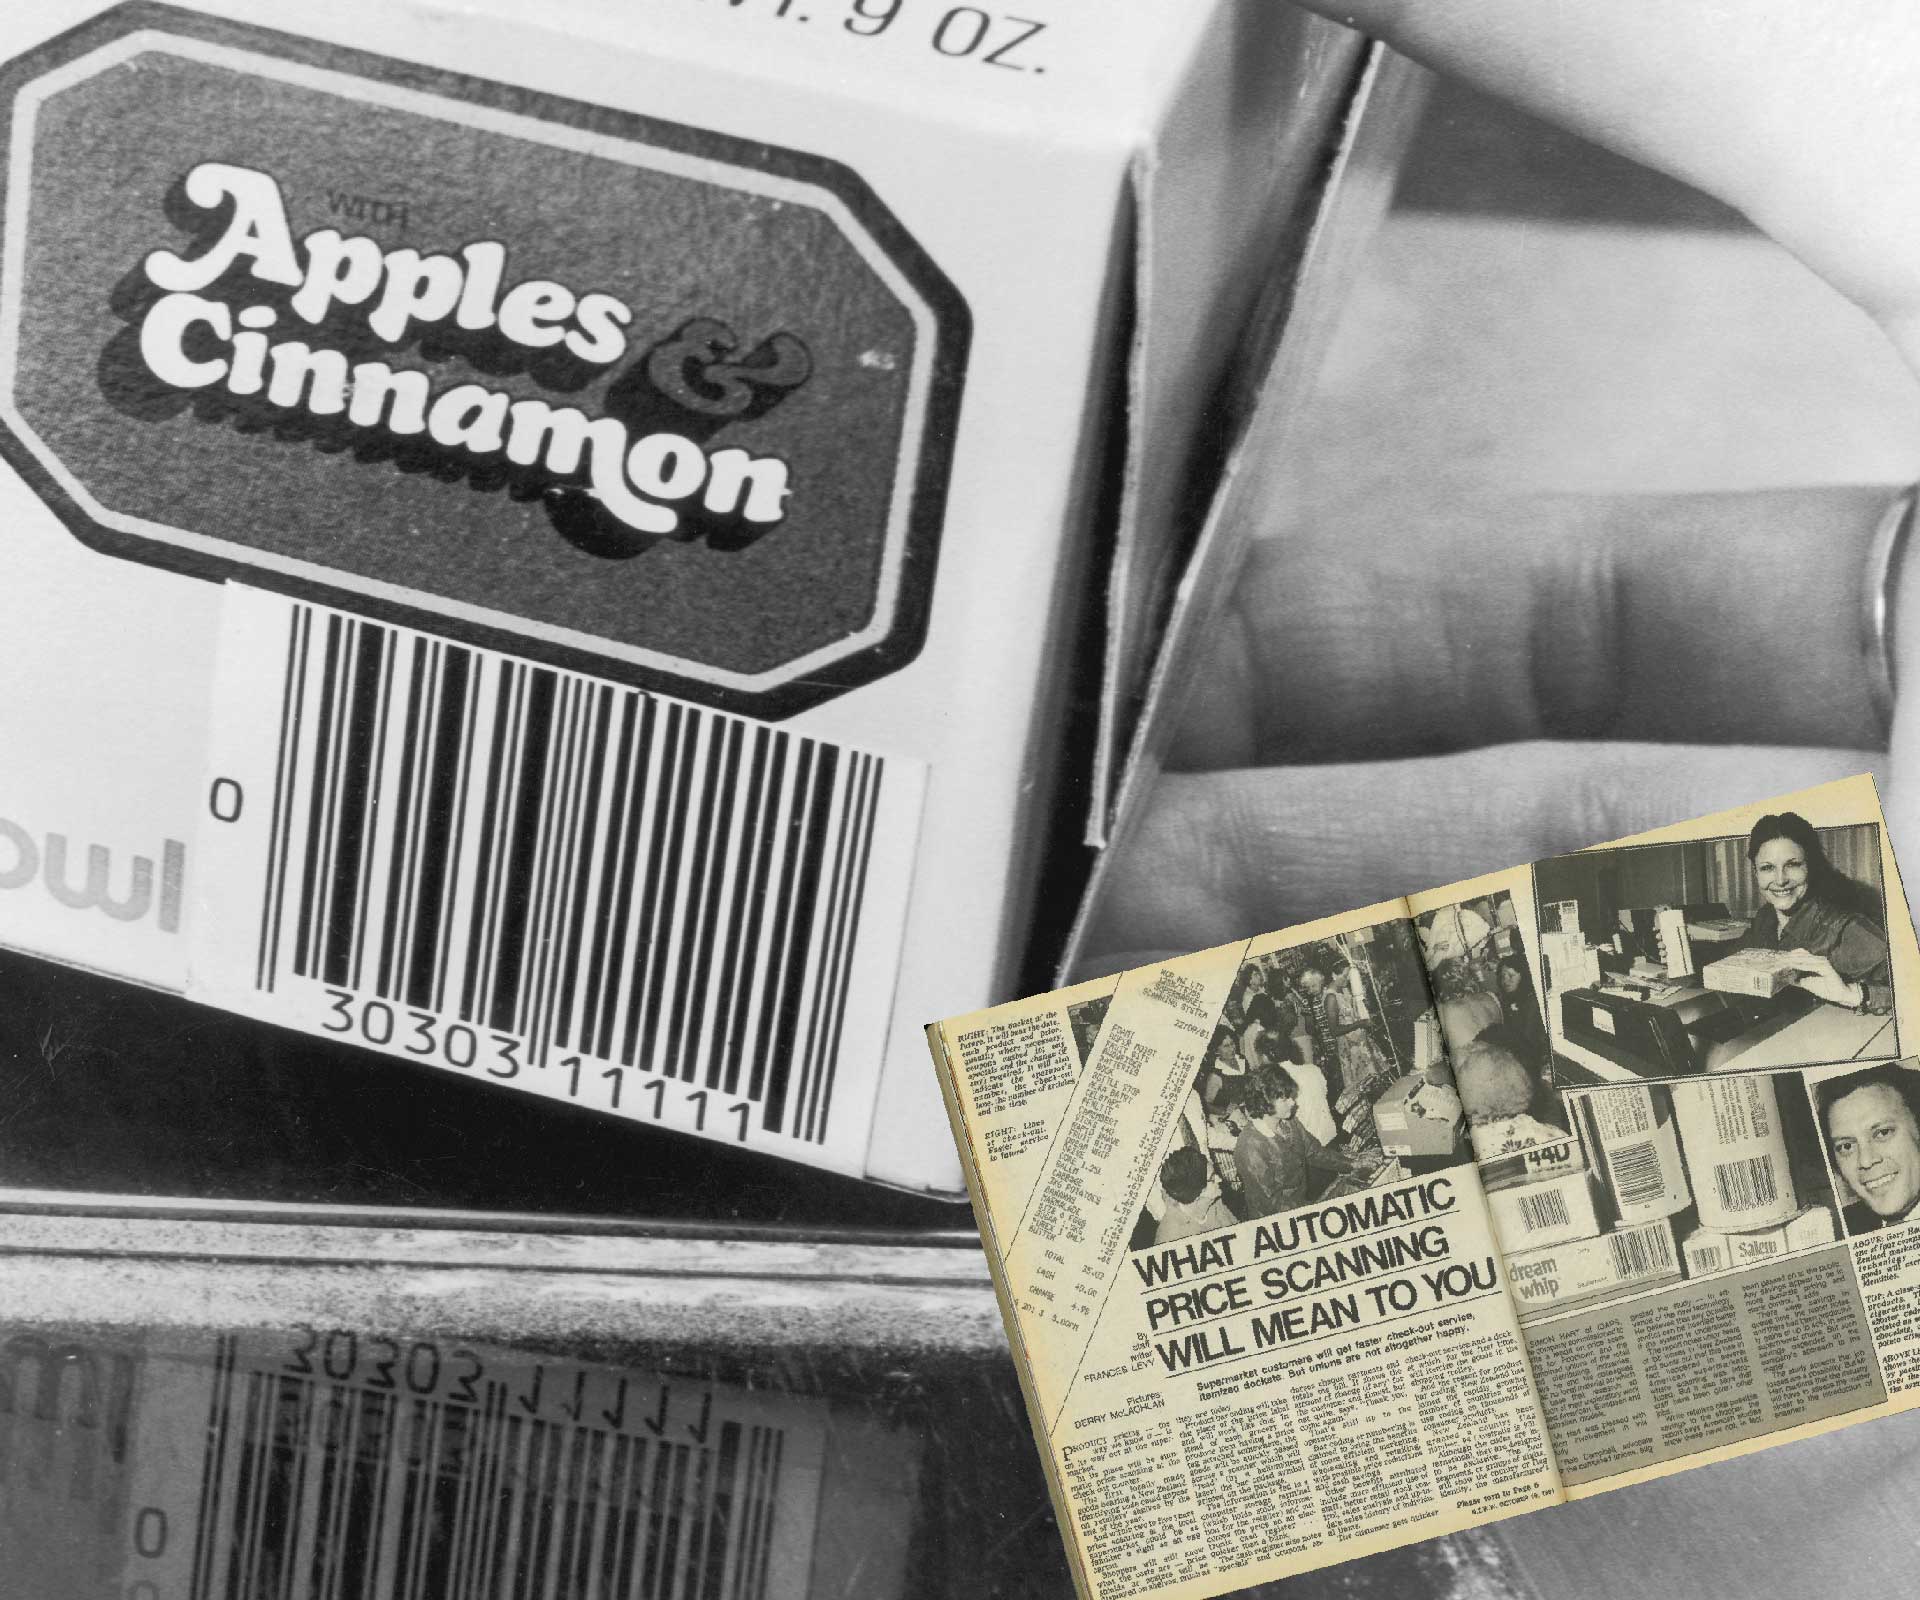 From the archives: When barcodes came to New Zealand